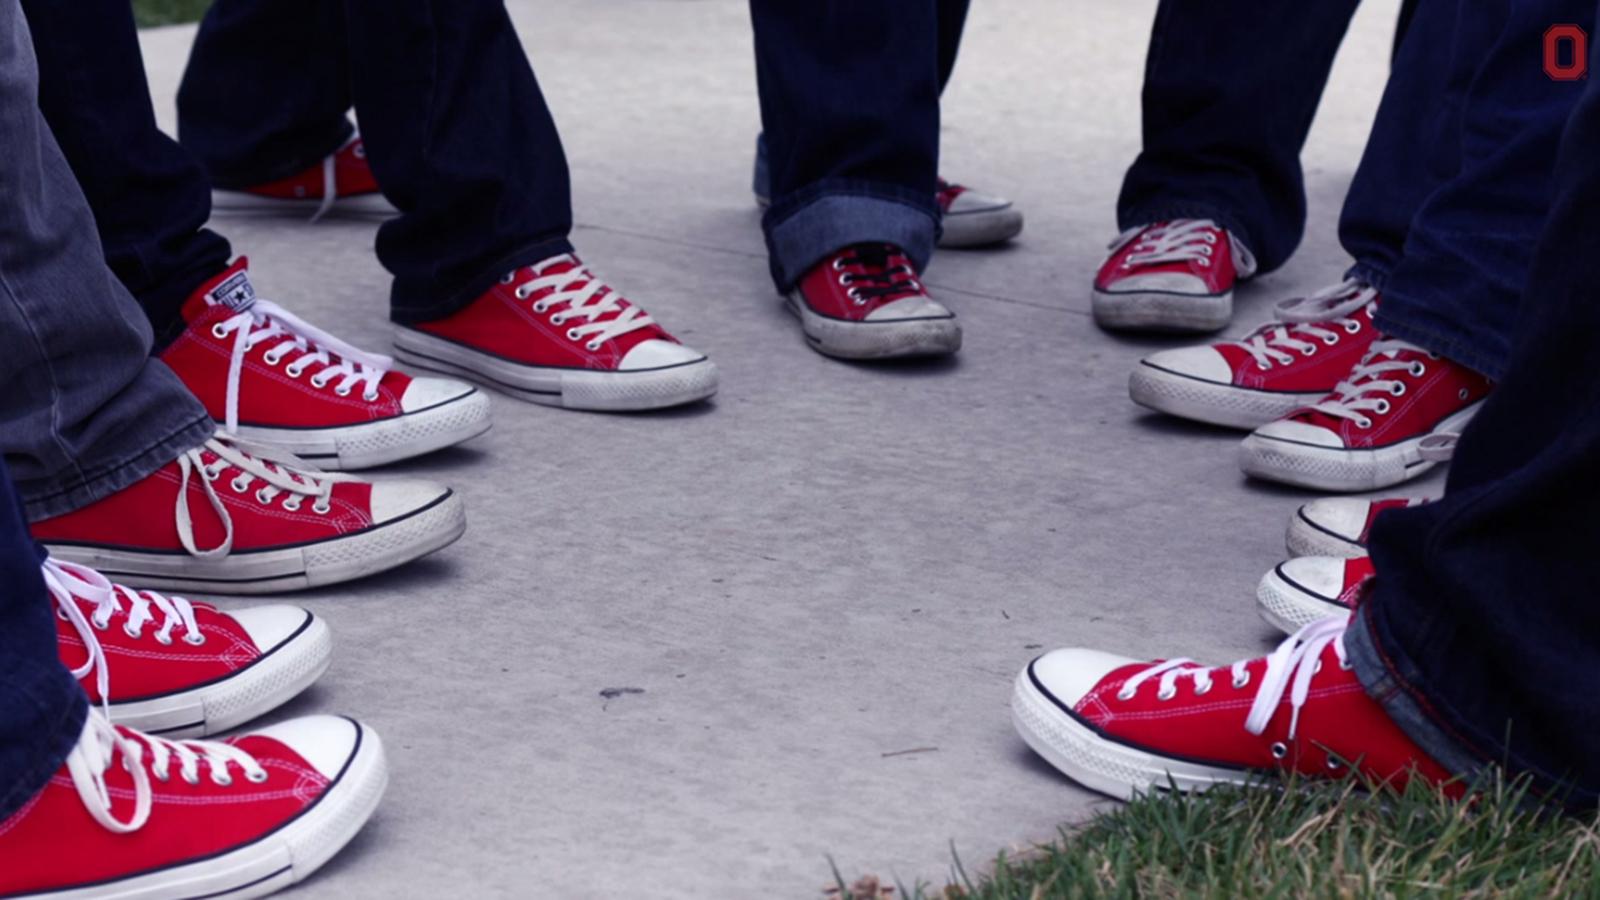 seven sets of people's feet wearing red tennis shoes